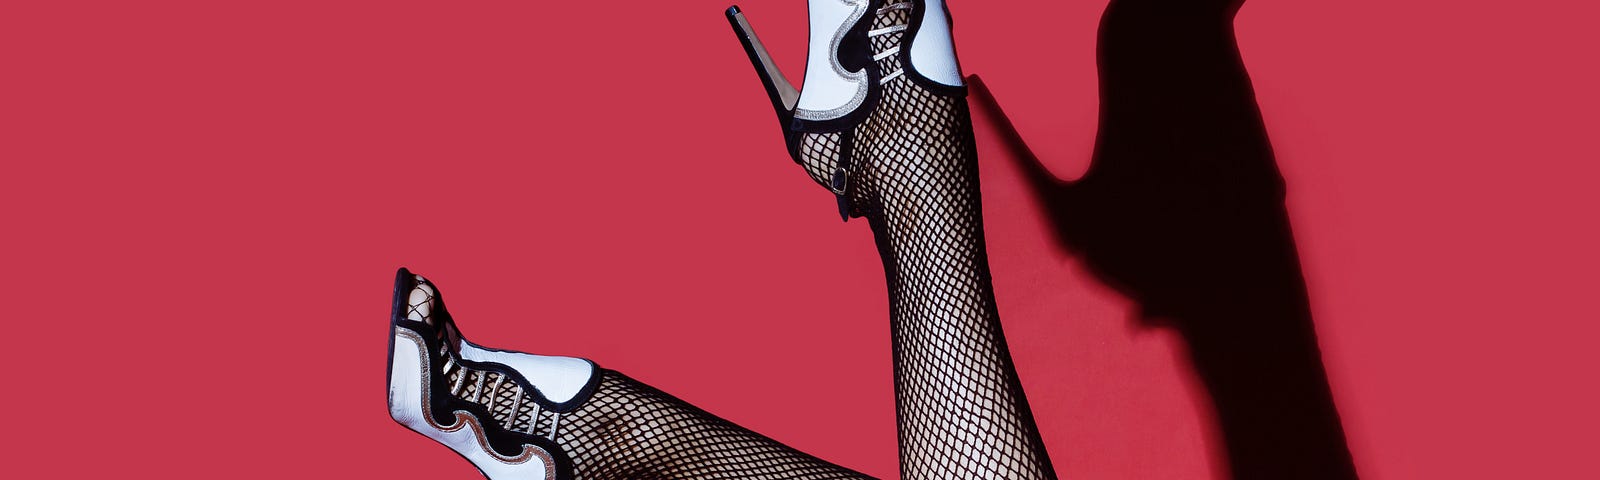 Women’s legs in fishnet stockings and black and white stilettos in front of a red background.